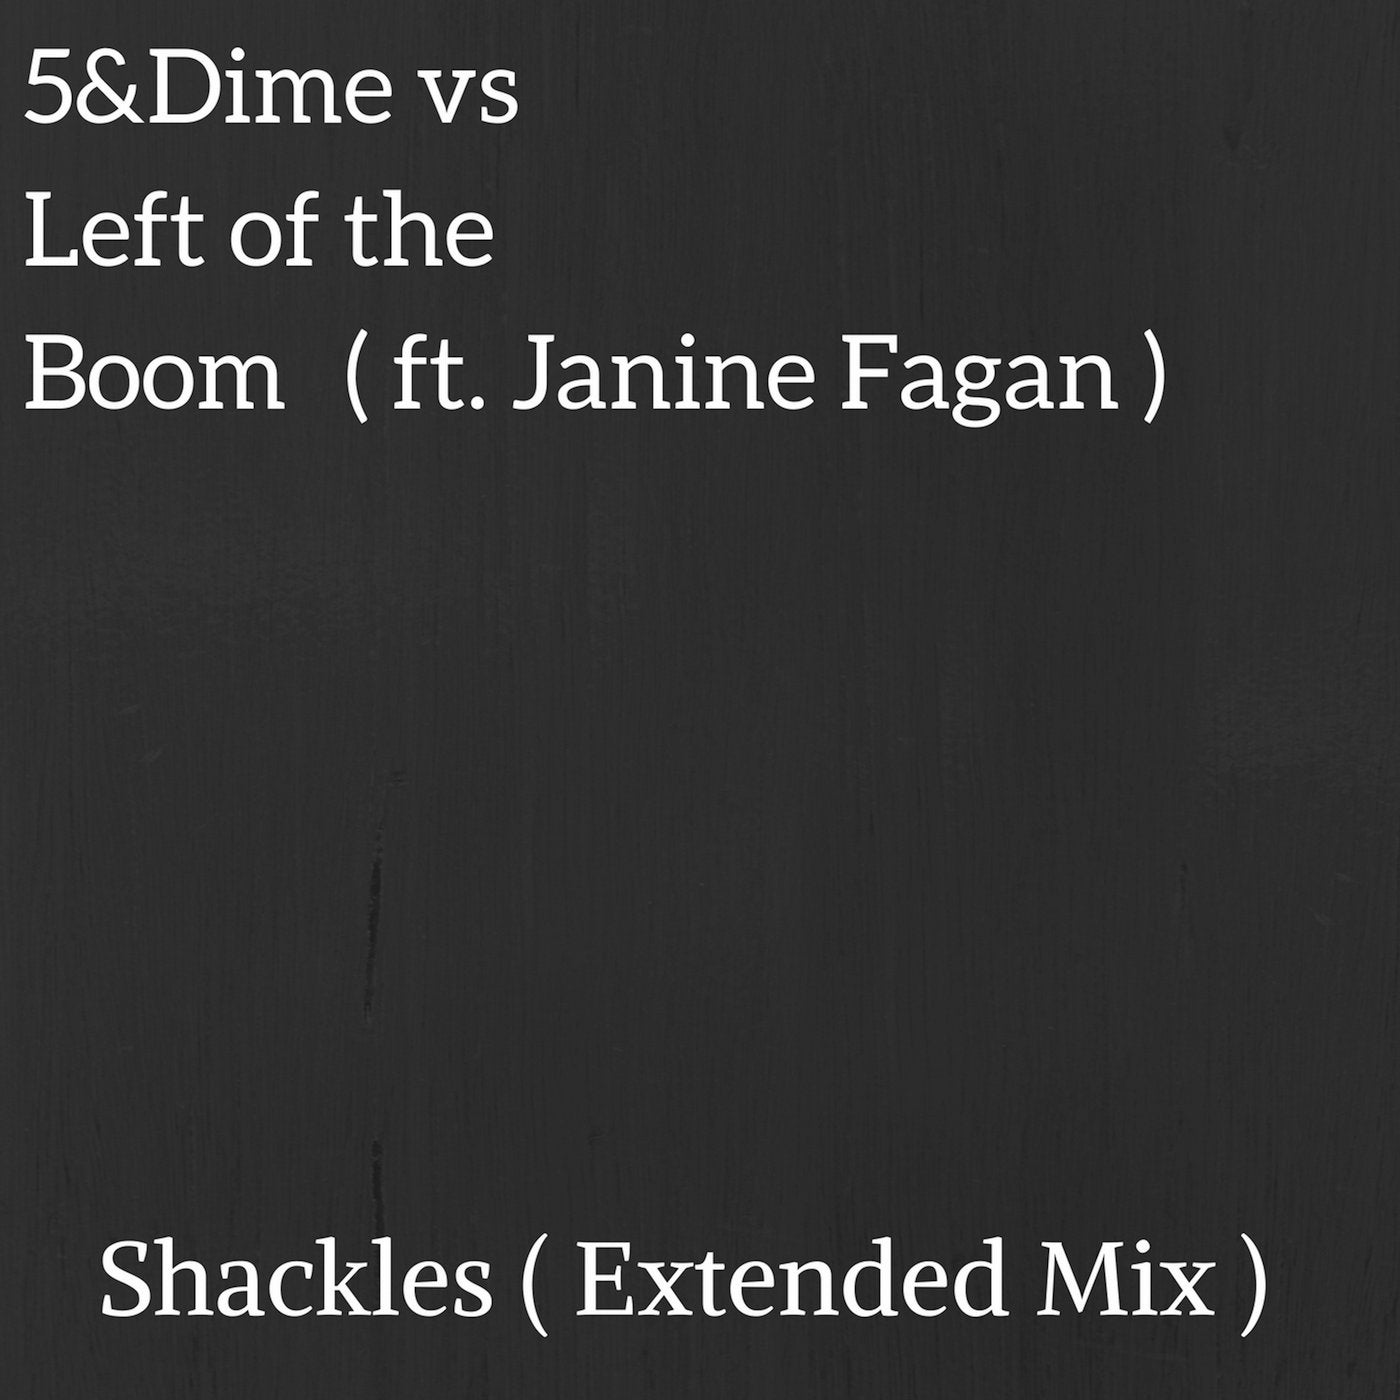 Shackles (Extended Mix) feat. Janine Fagan